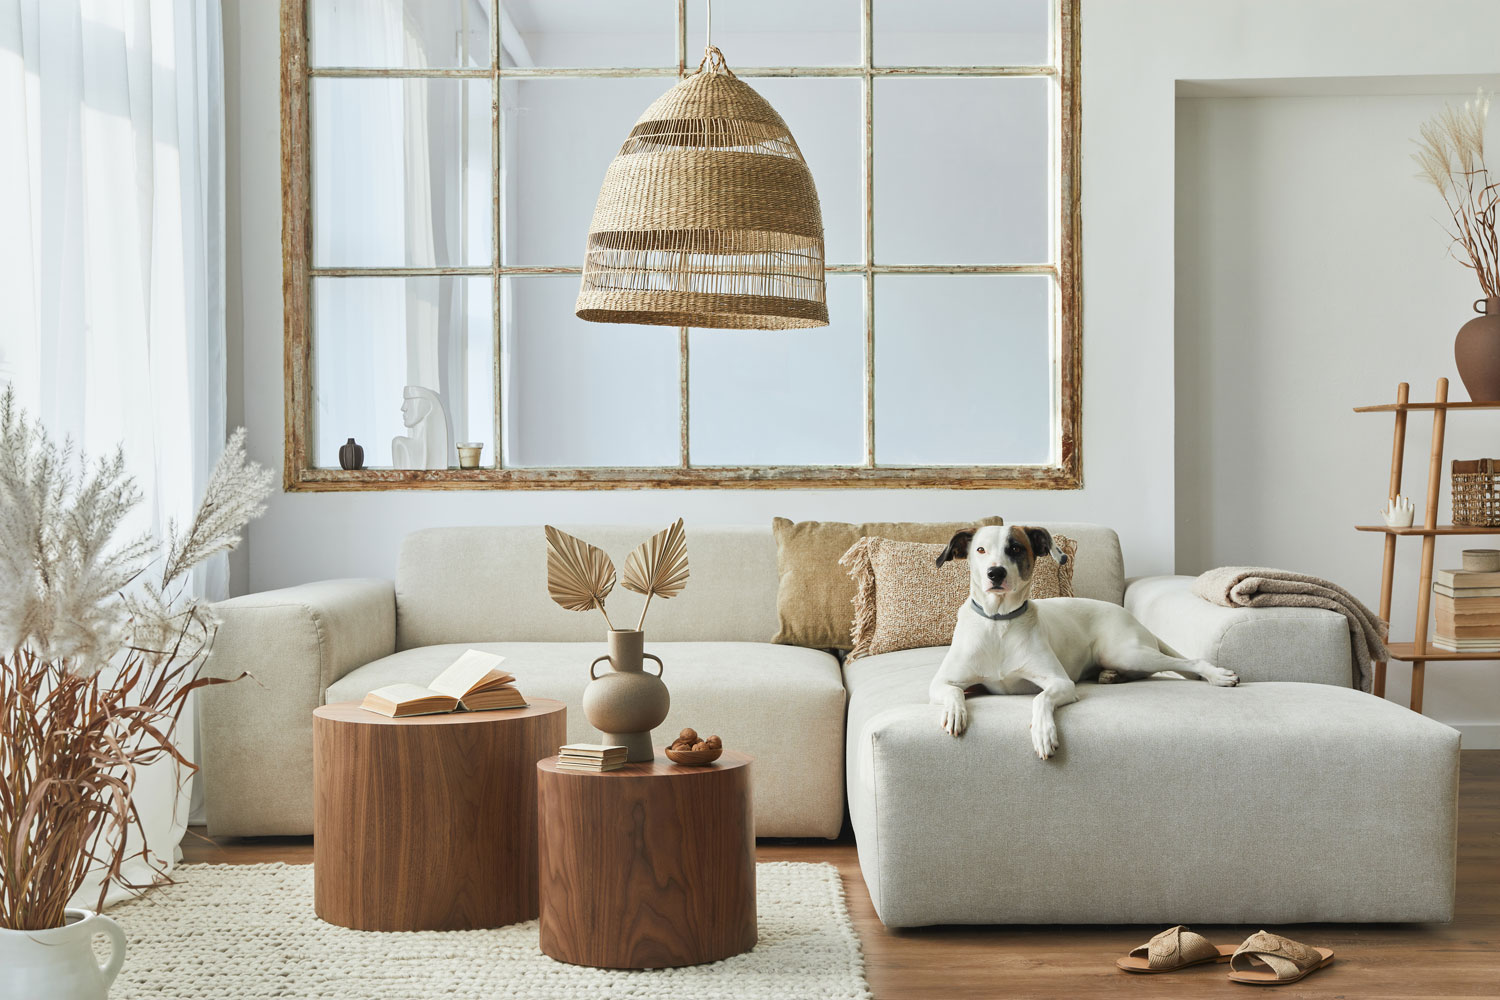 A light beige modular sofa with two round coffee tables inside bohemian inspired living room